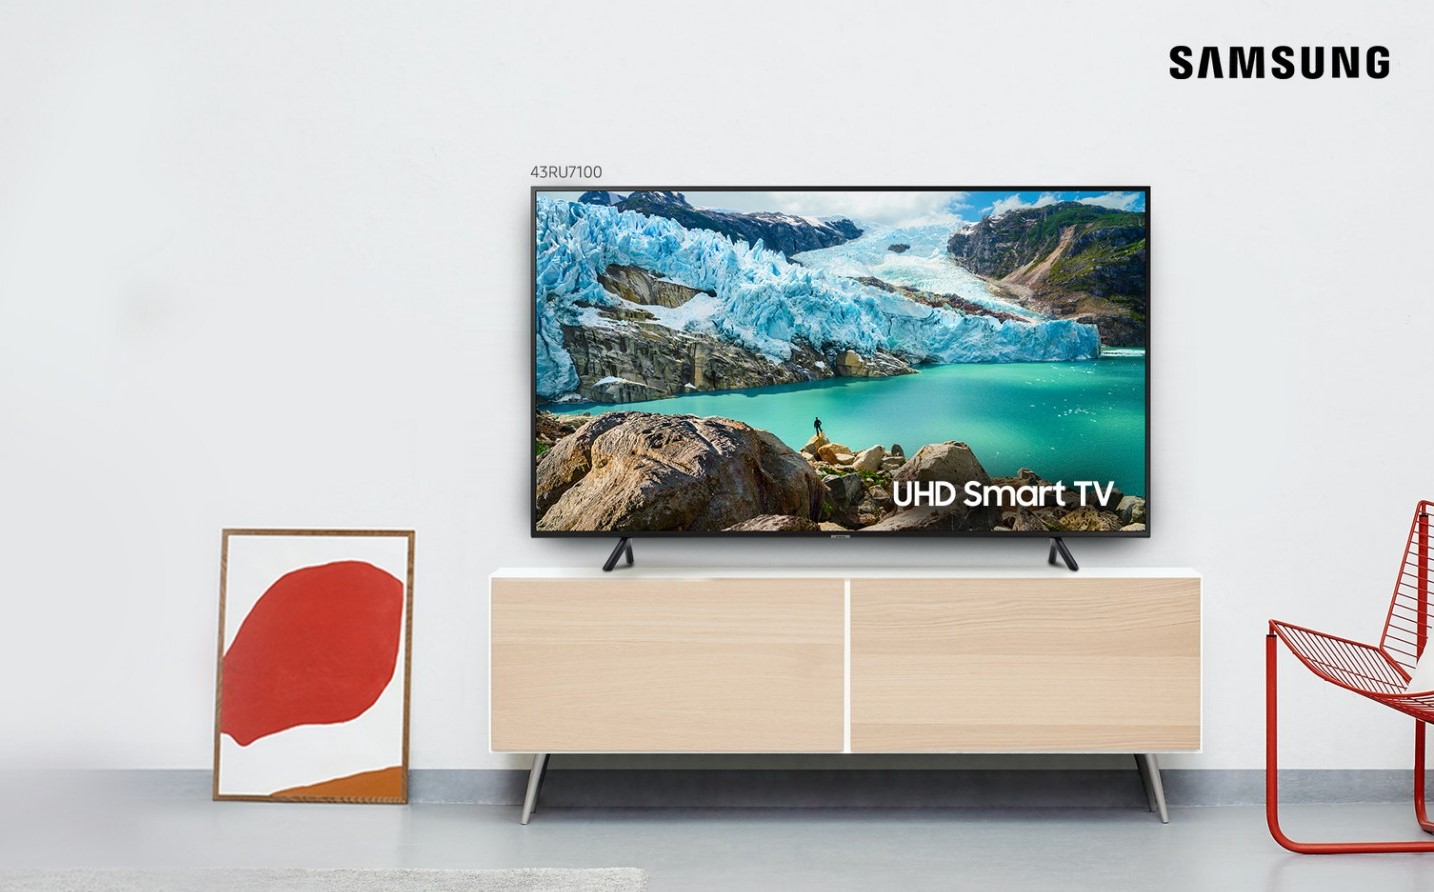 It’s better at home with Samsung’s exciting new offers